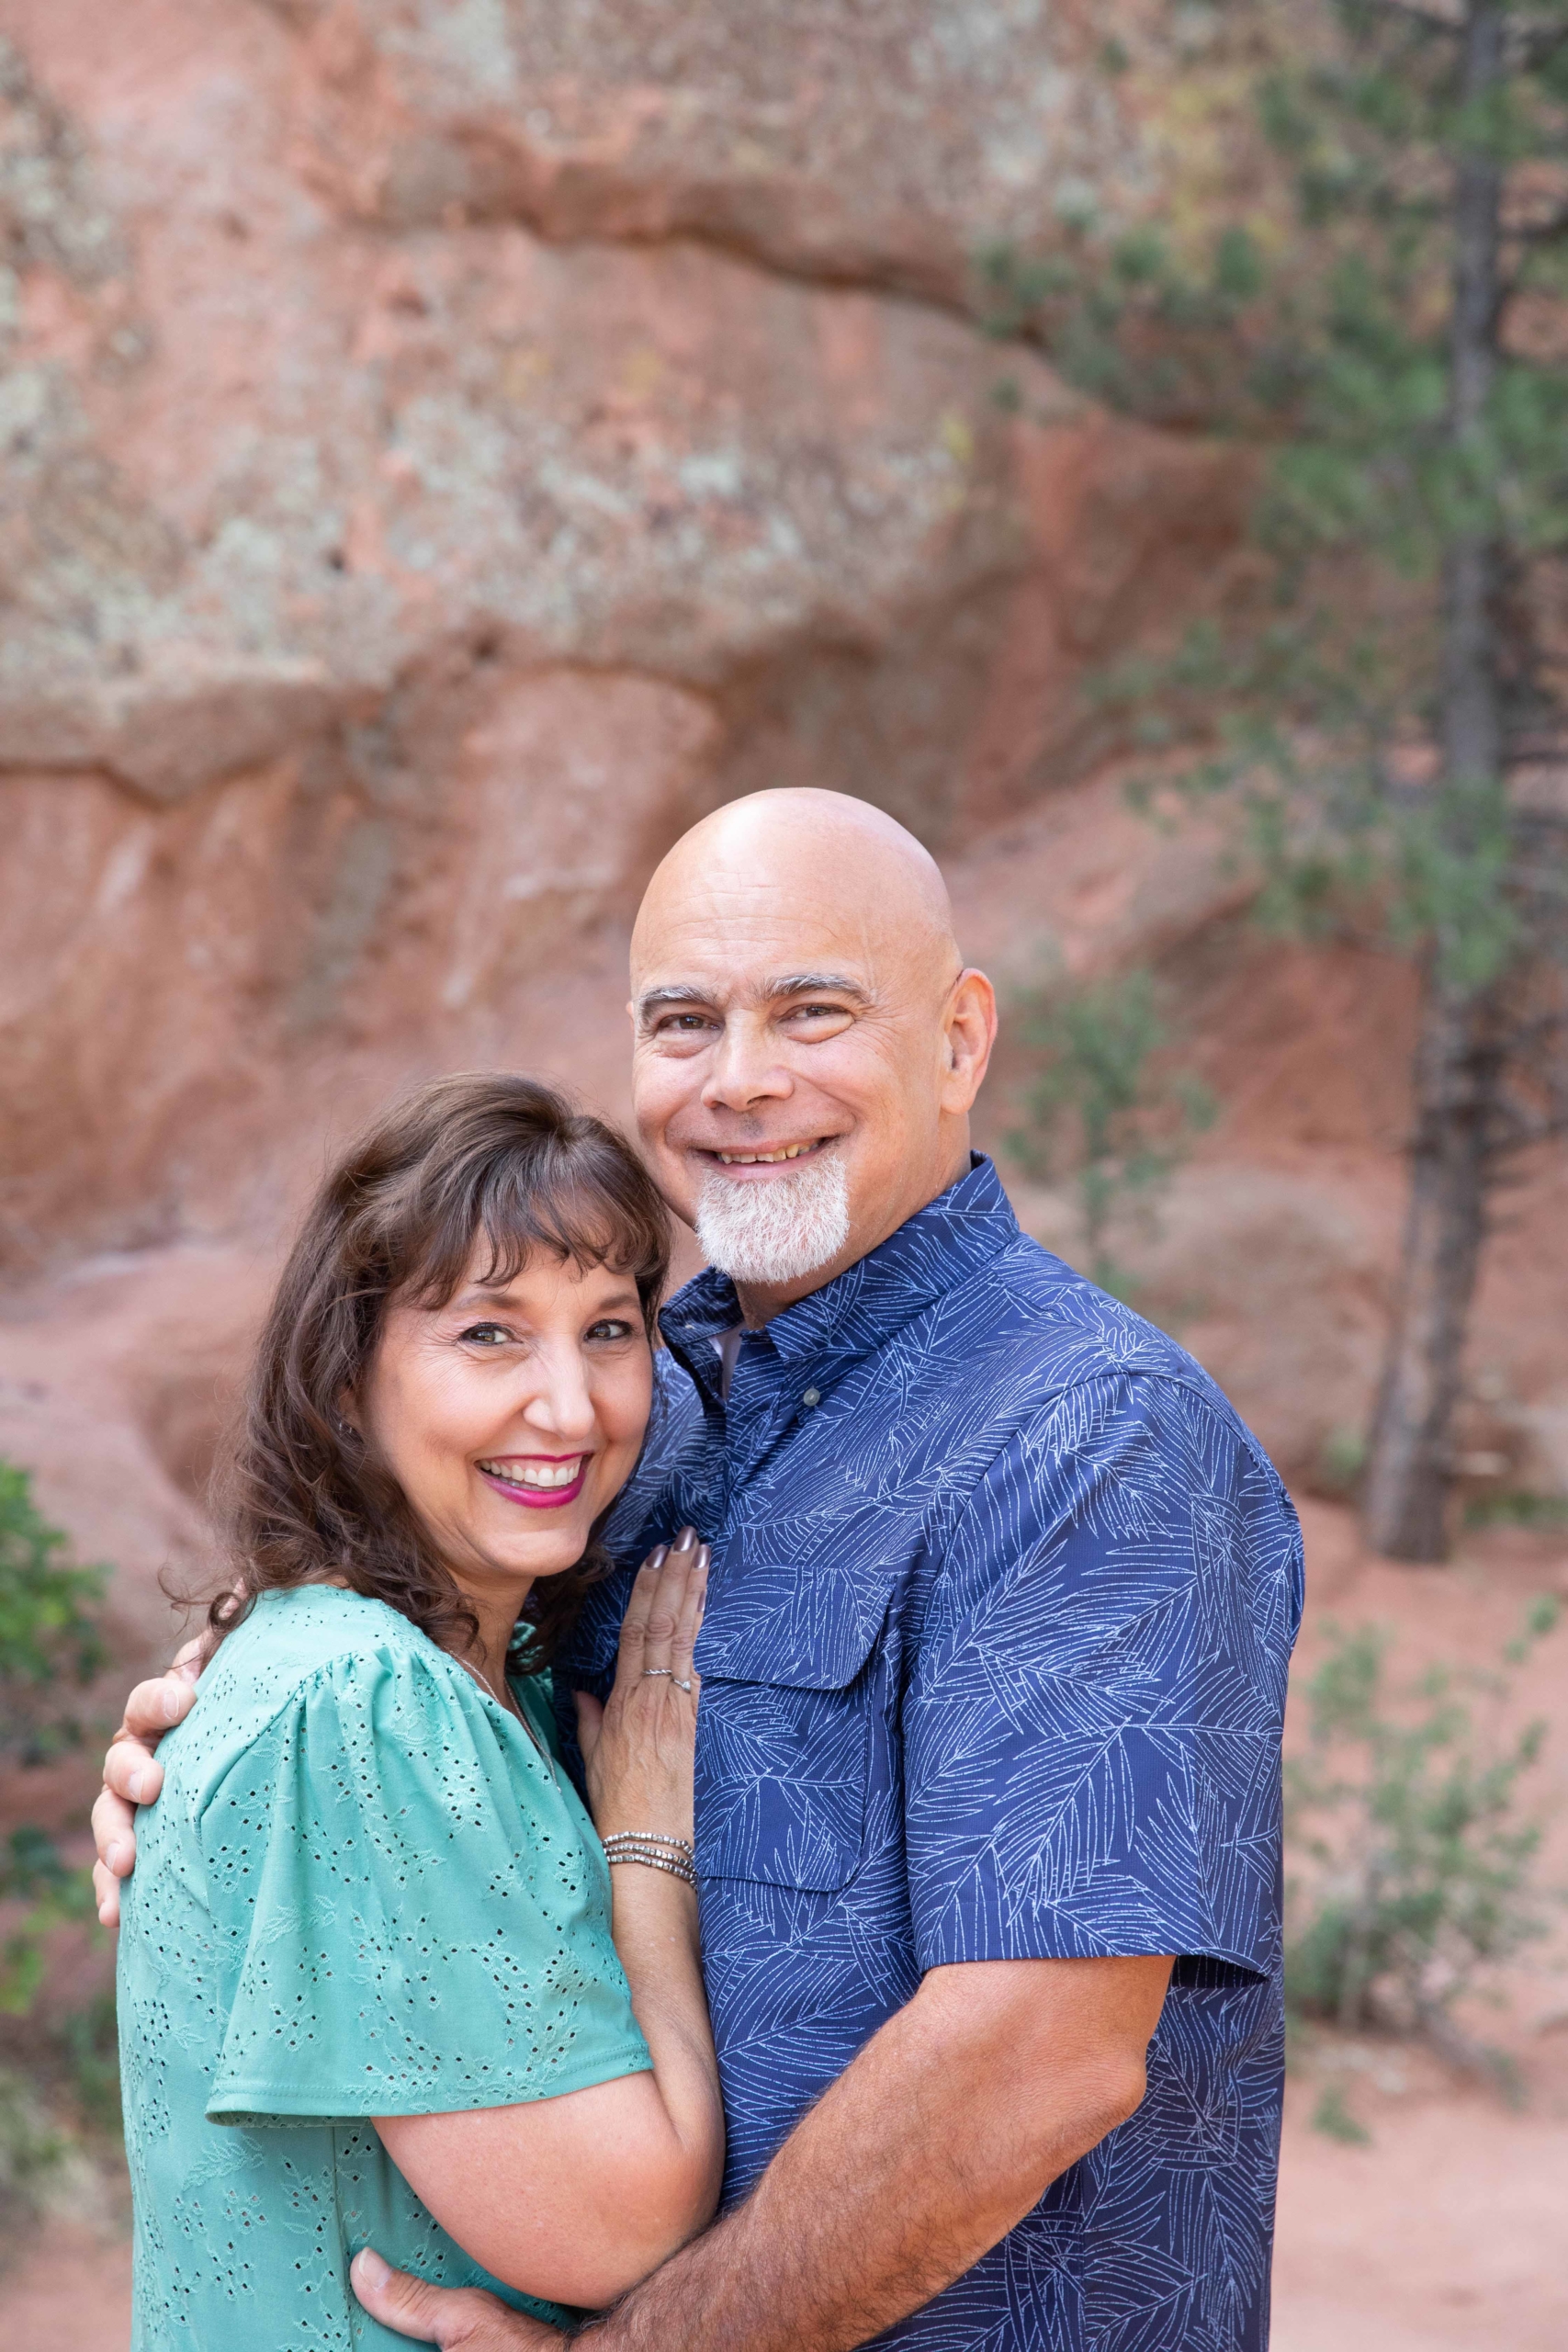 daughter and husband at red rocks open space